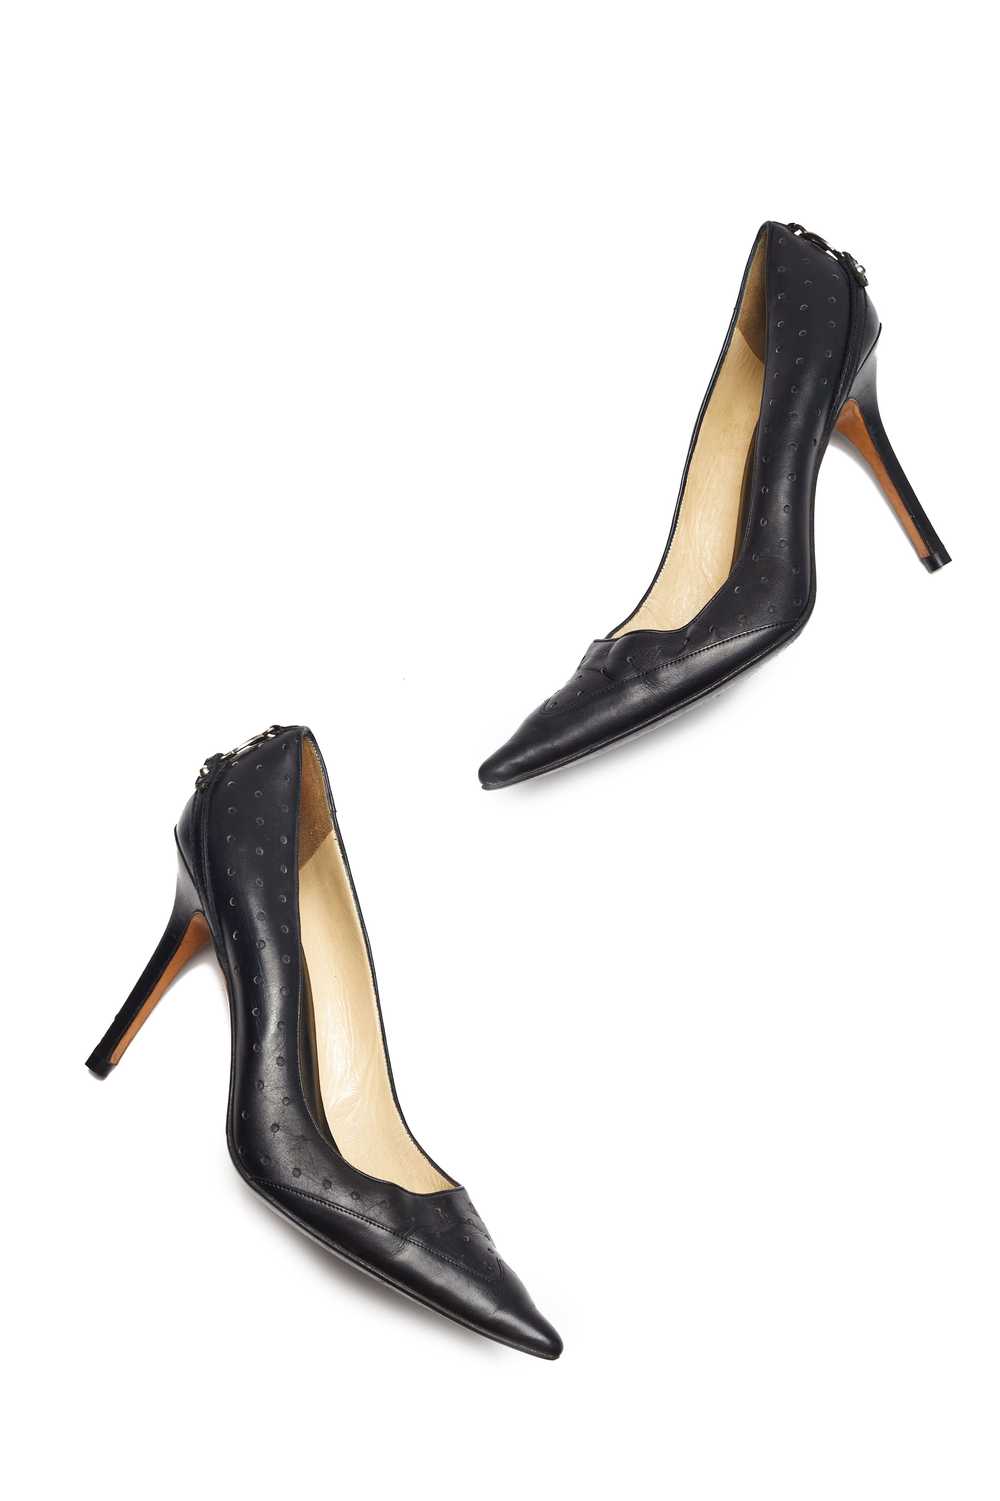 Gucci Y2K Tom Ford perforated leather logo pumps - image 1